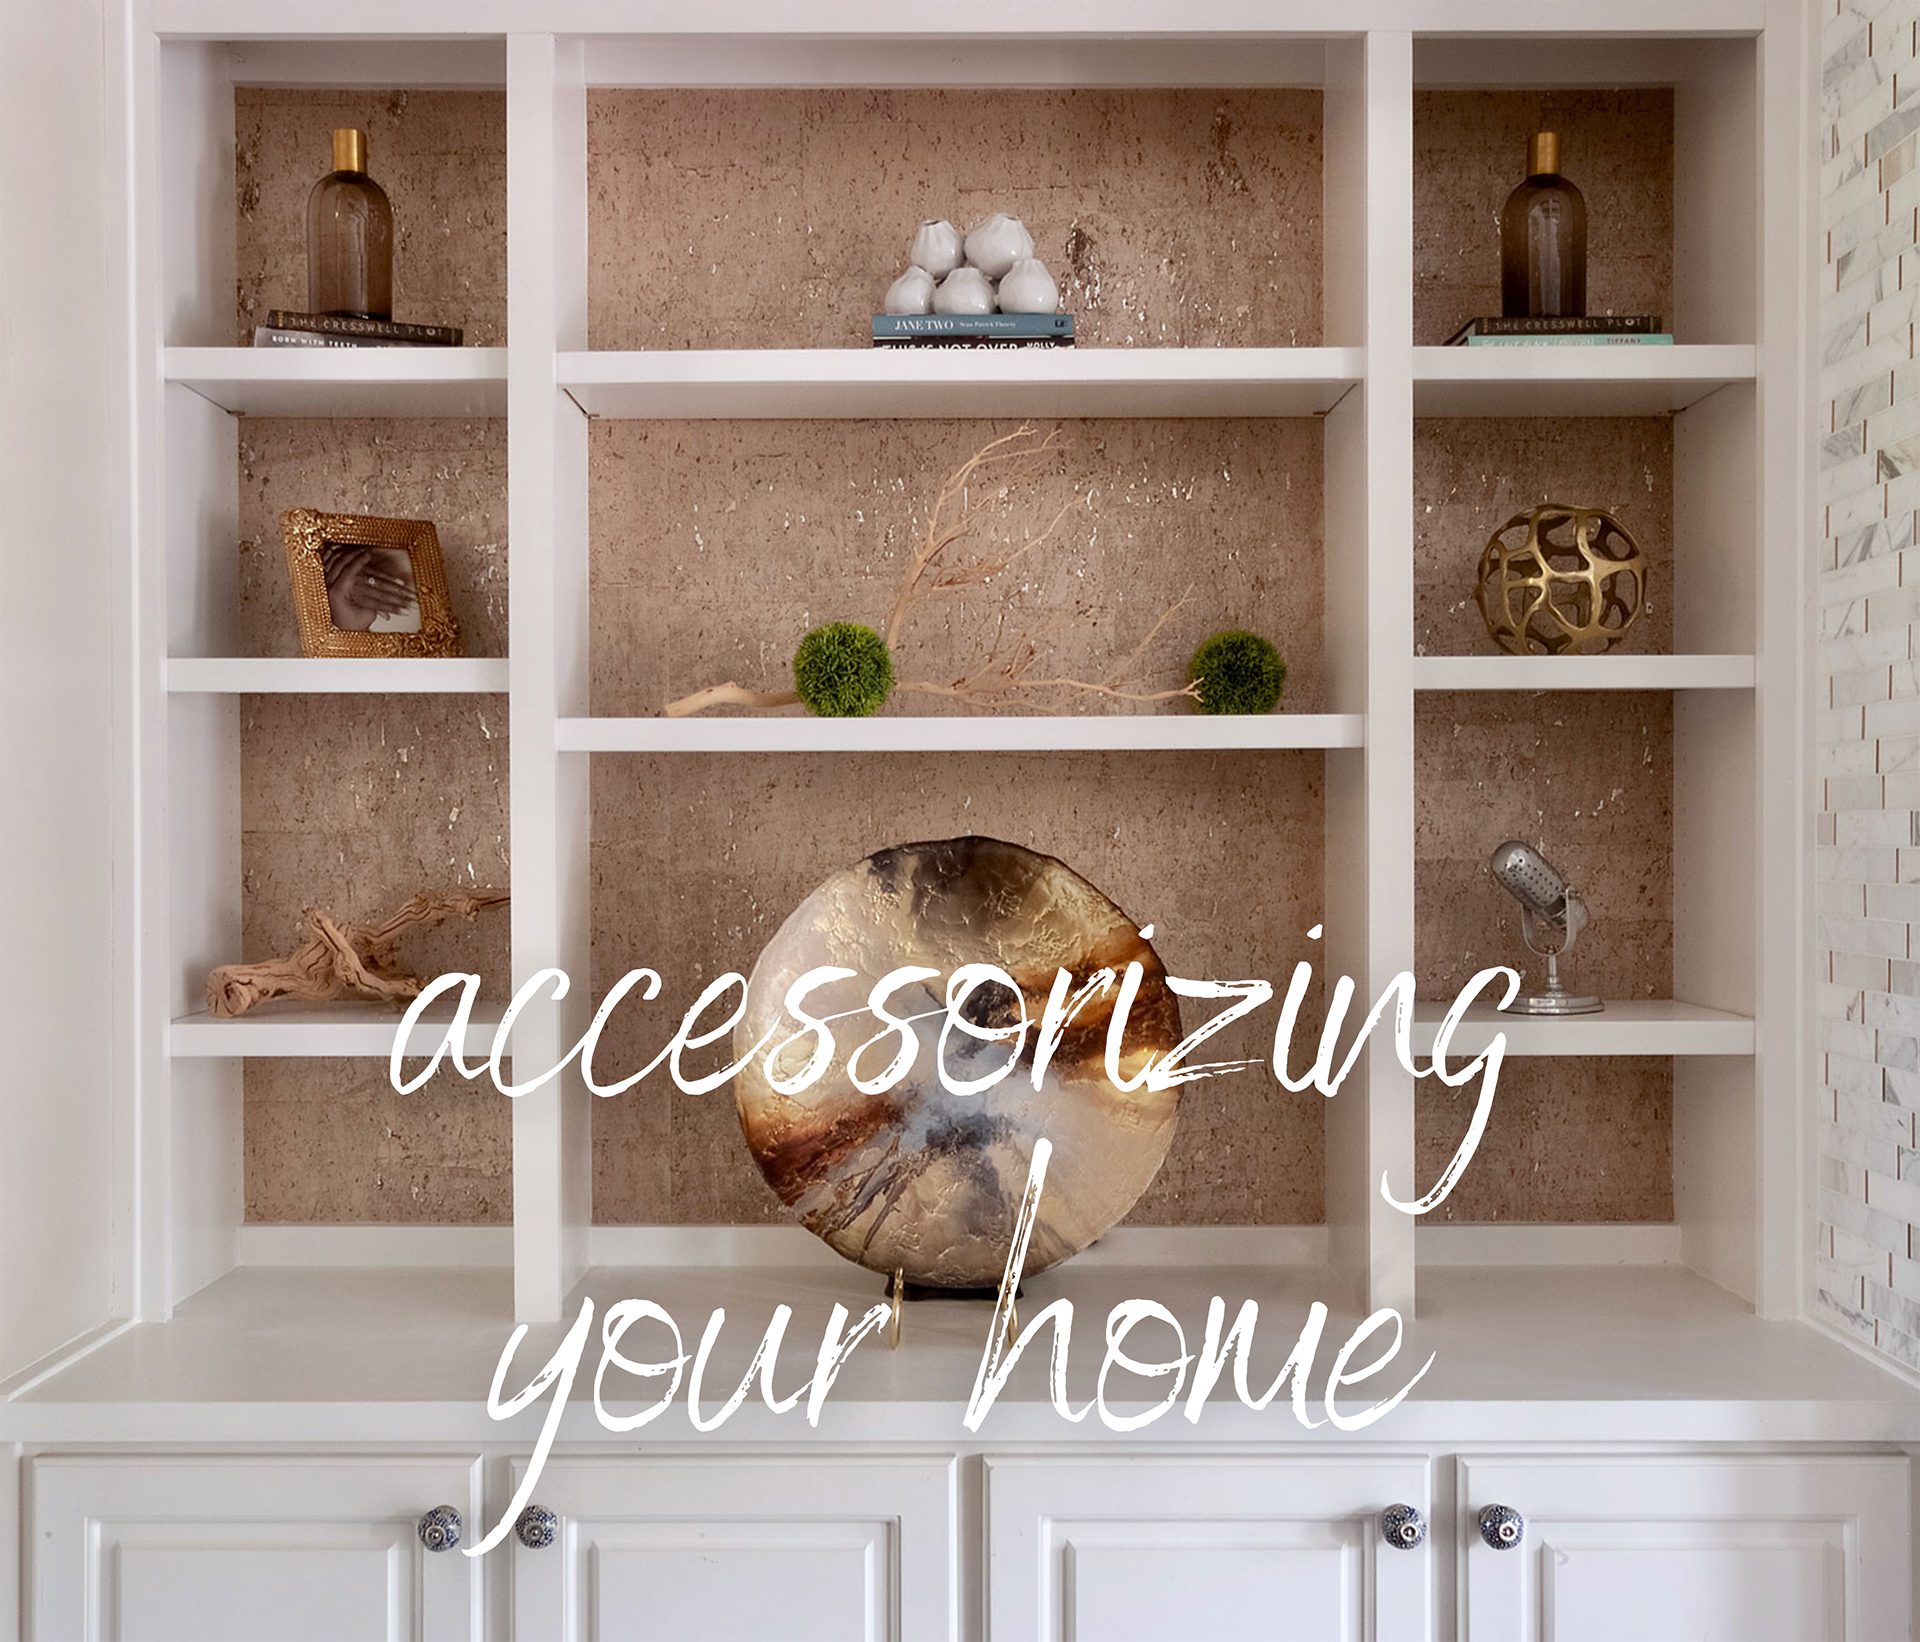 Accessorizing Your Home